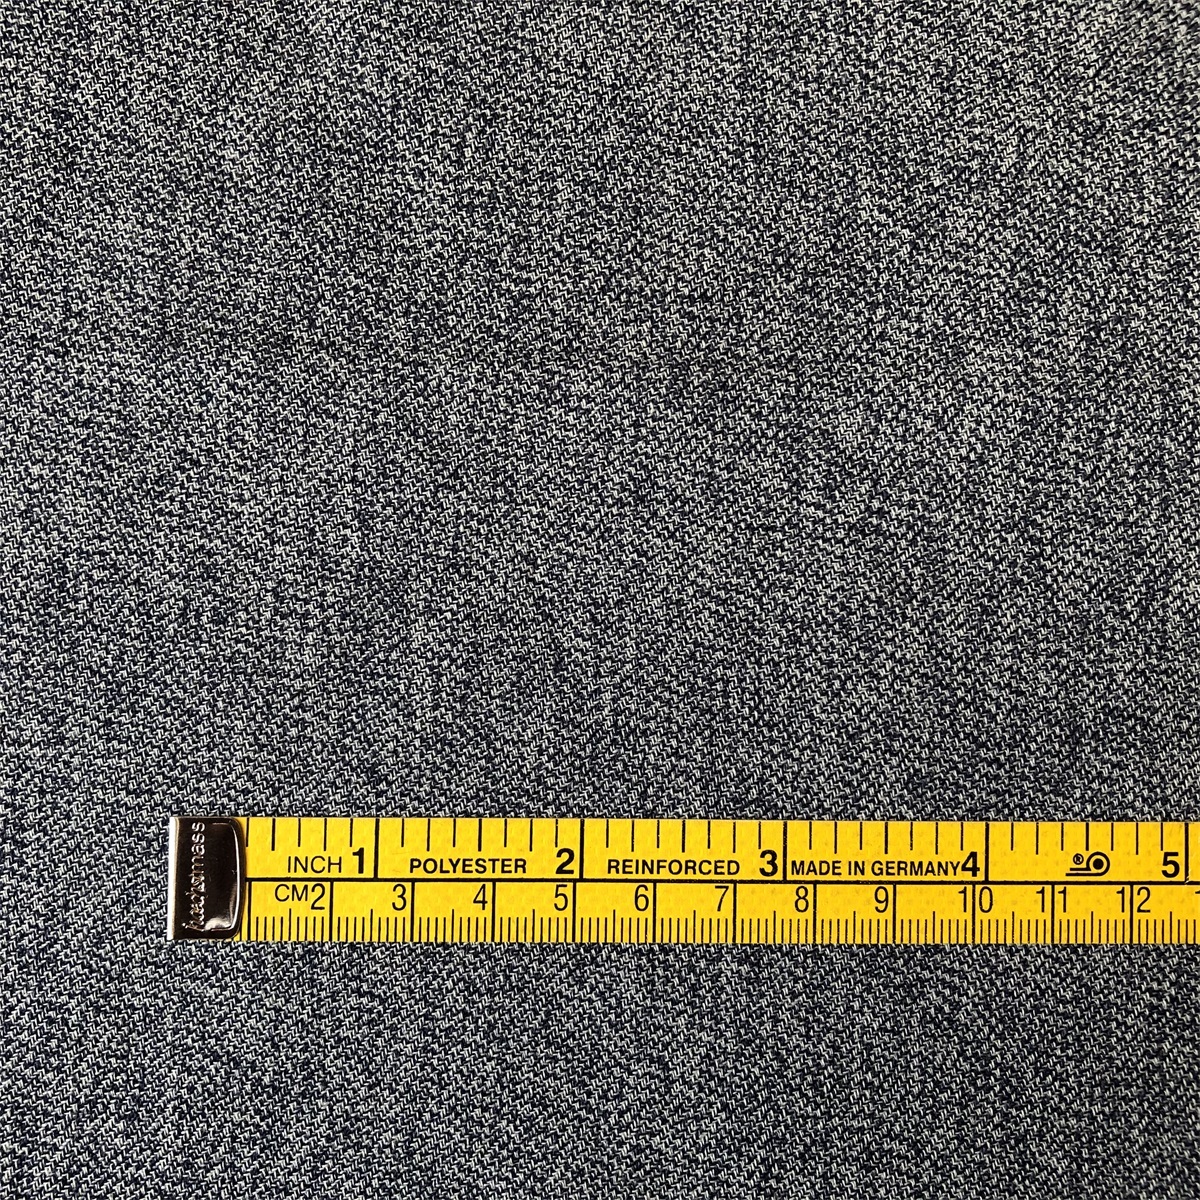 Cotton Yarn Dyed Fabric for men's shirts by mouline yarn 100% cotton yarn dyed twill chambray shirts woven fabric